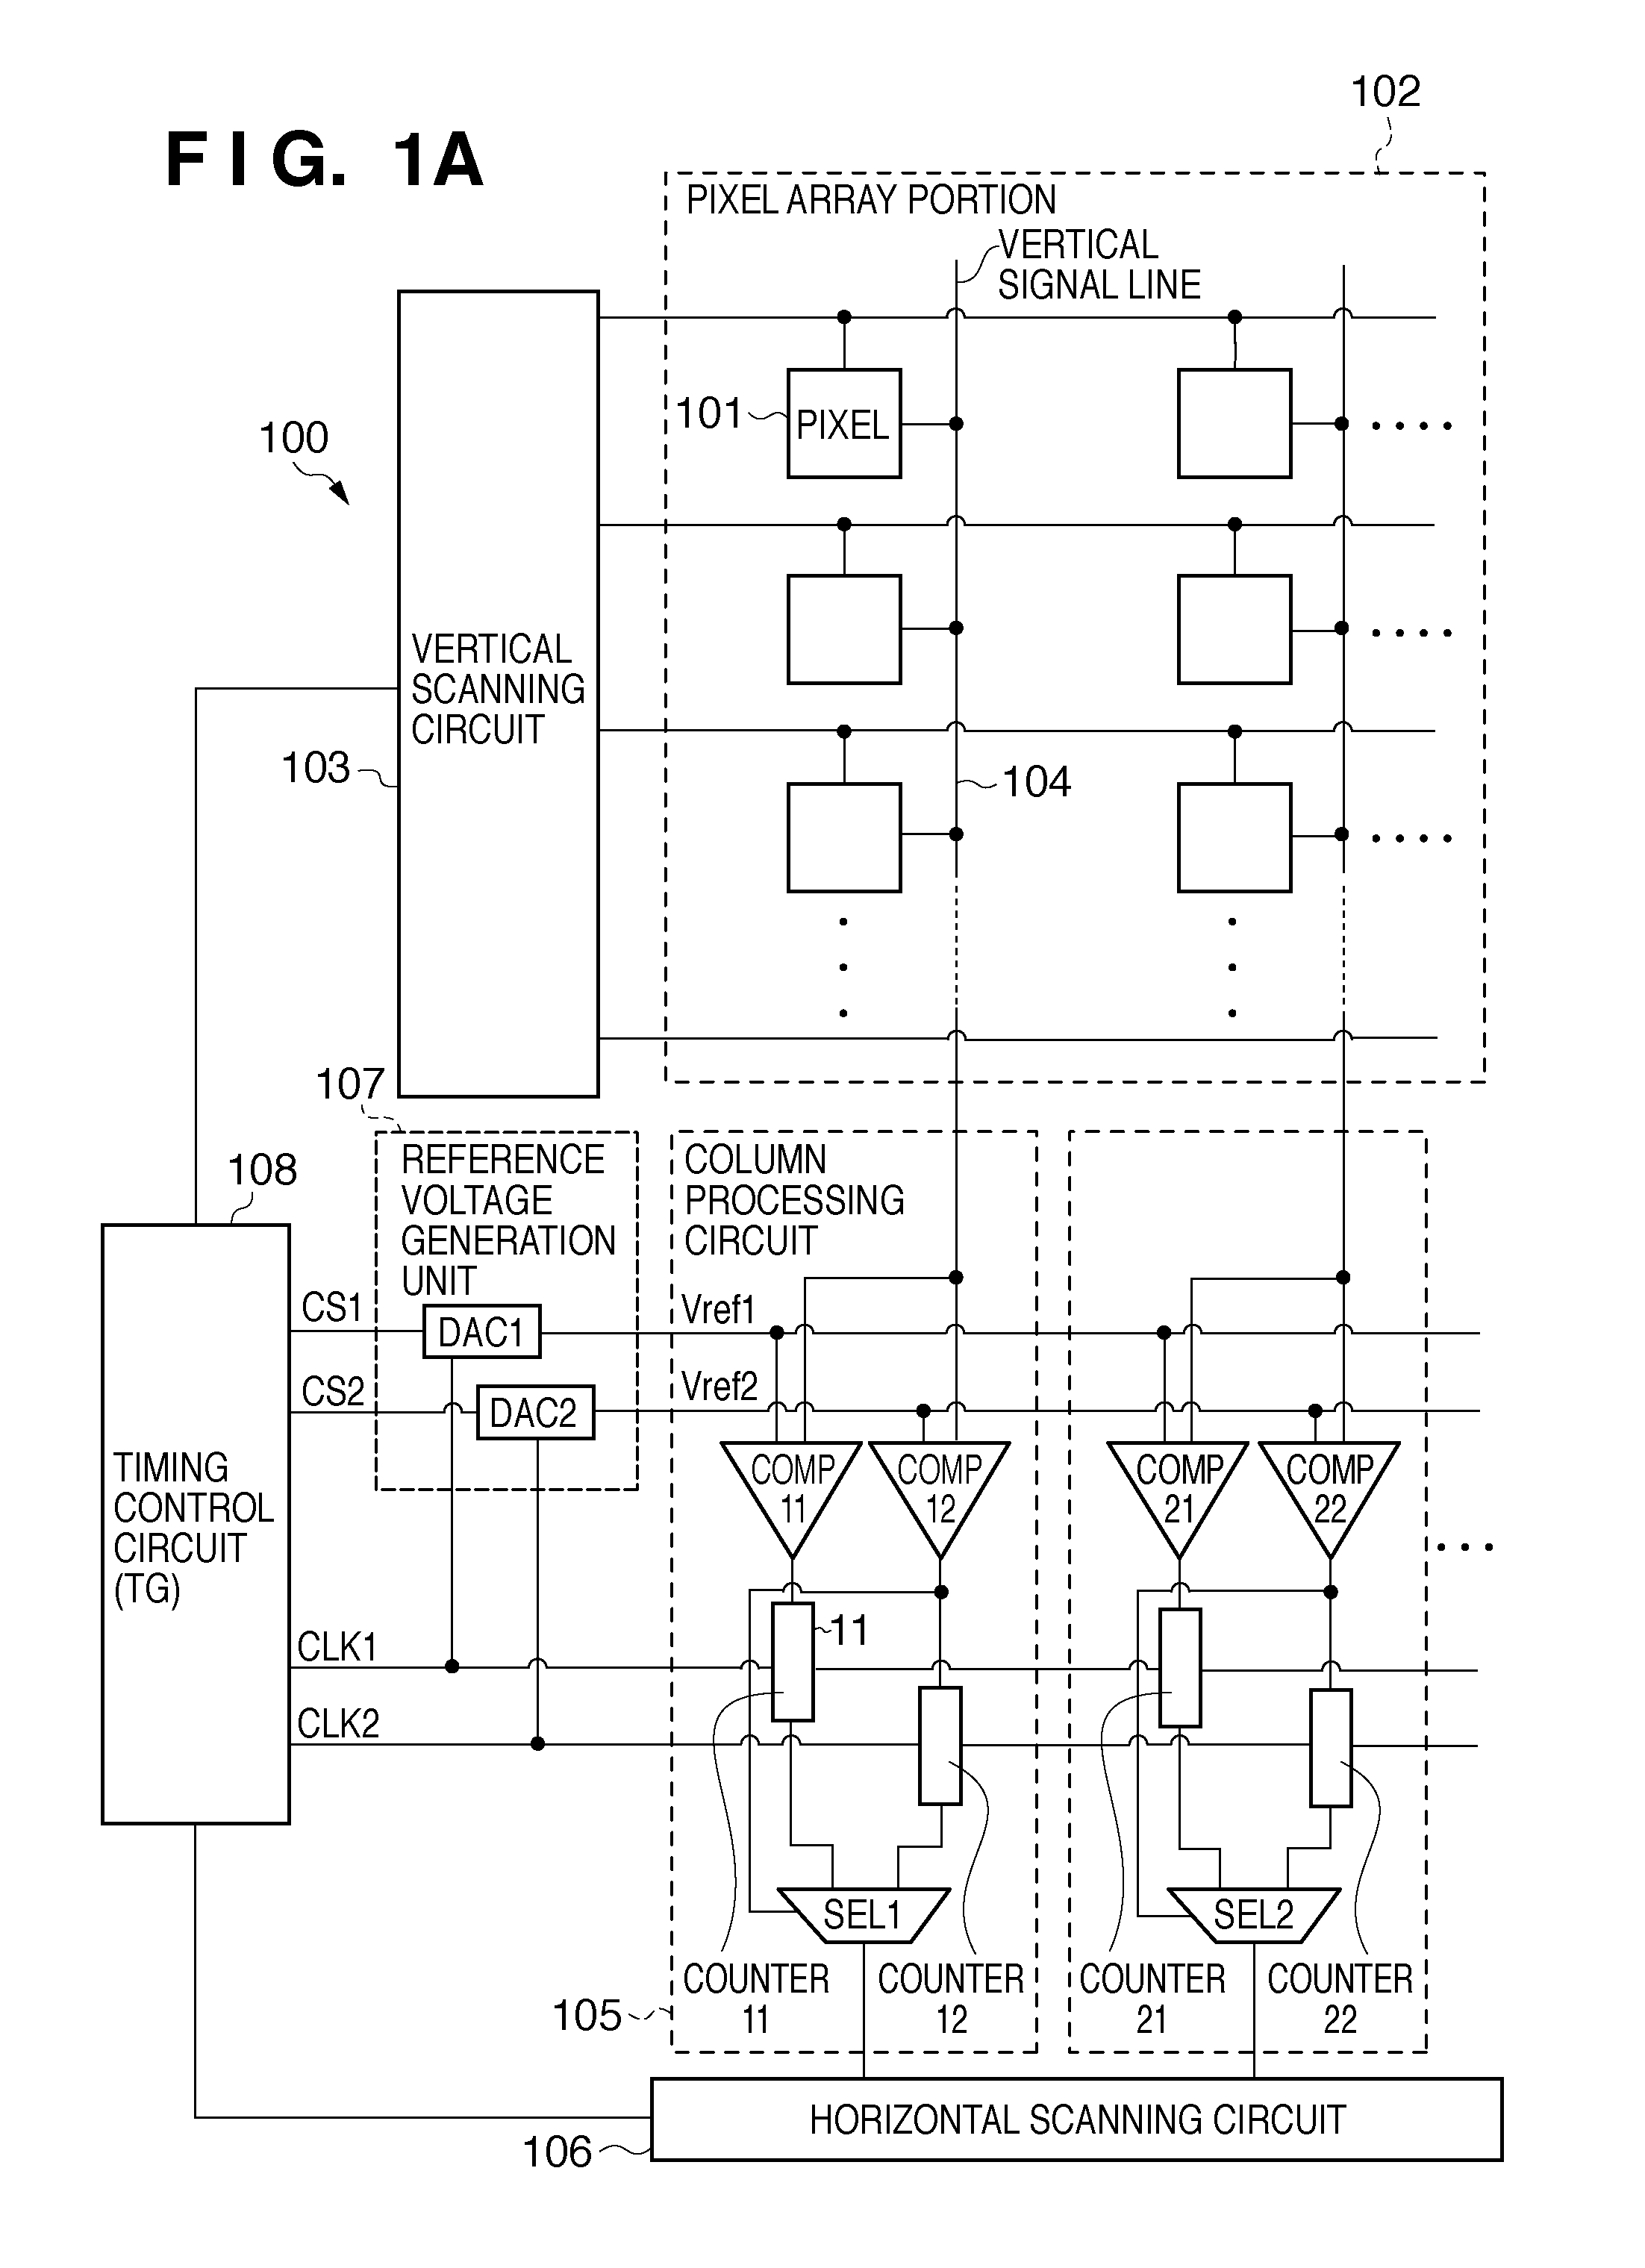 Solid-state image sensing element and image sensing system including comparison units with switchable frequency band characteristics